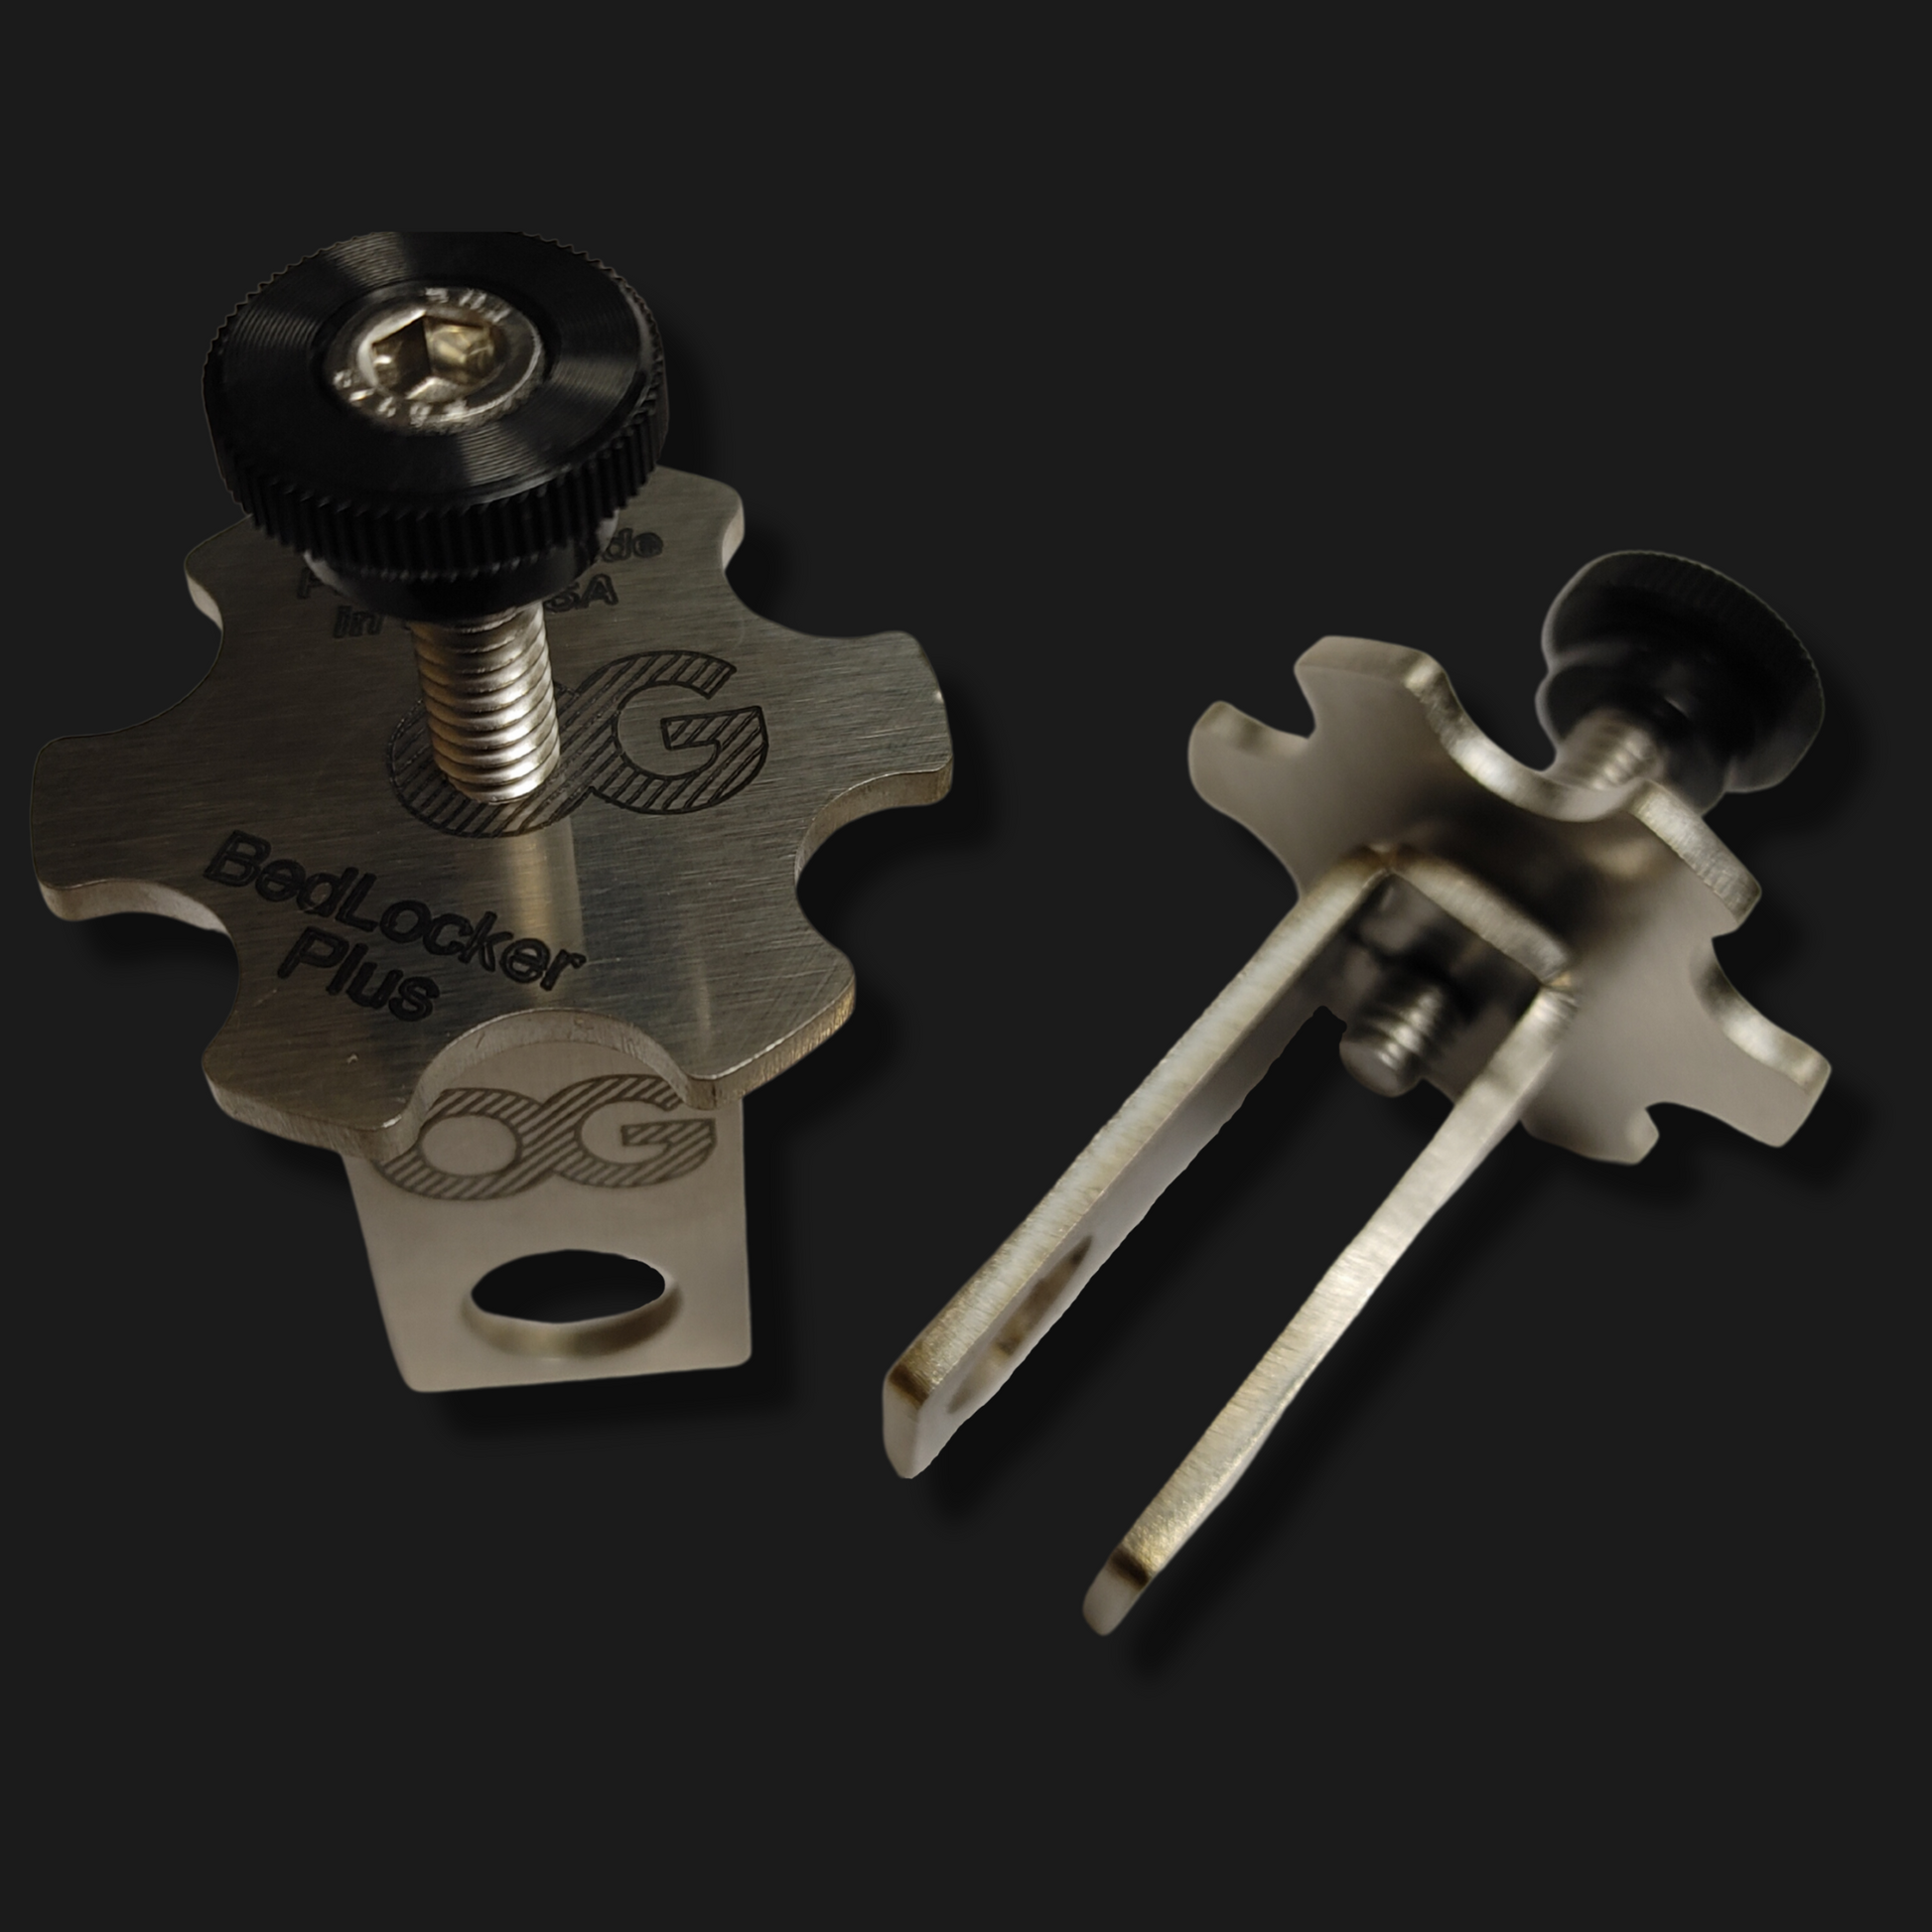 A secondary angle of the assembled 2 unit set of bedlock plus products, showcasing the laser etching on the lock wheel.